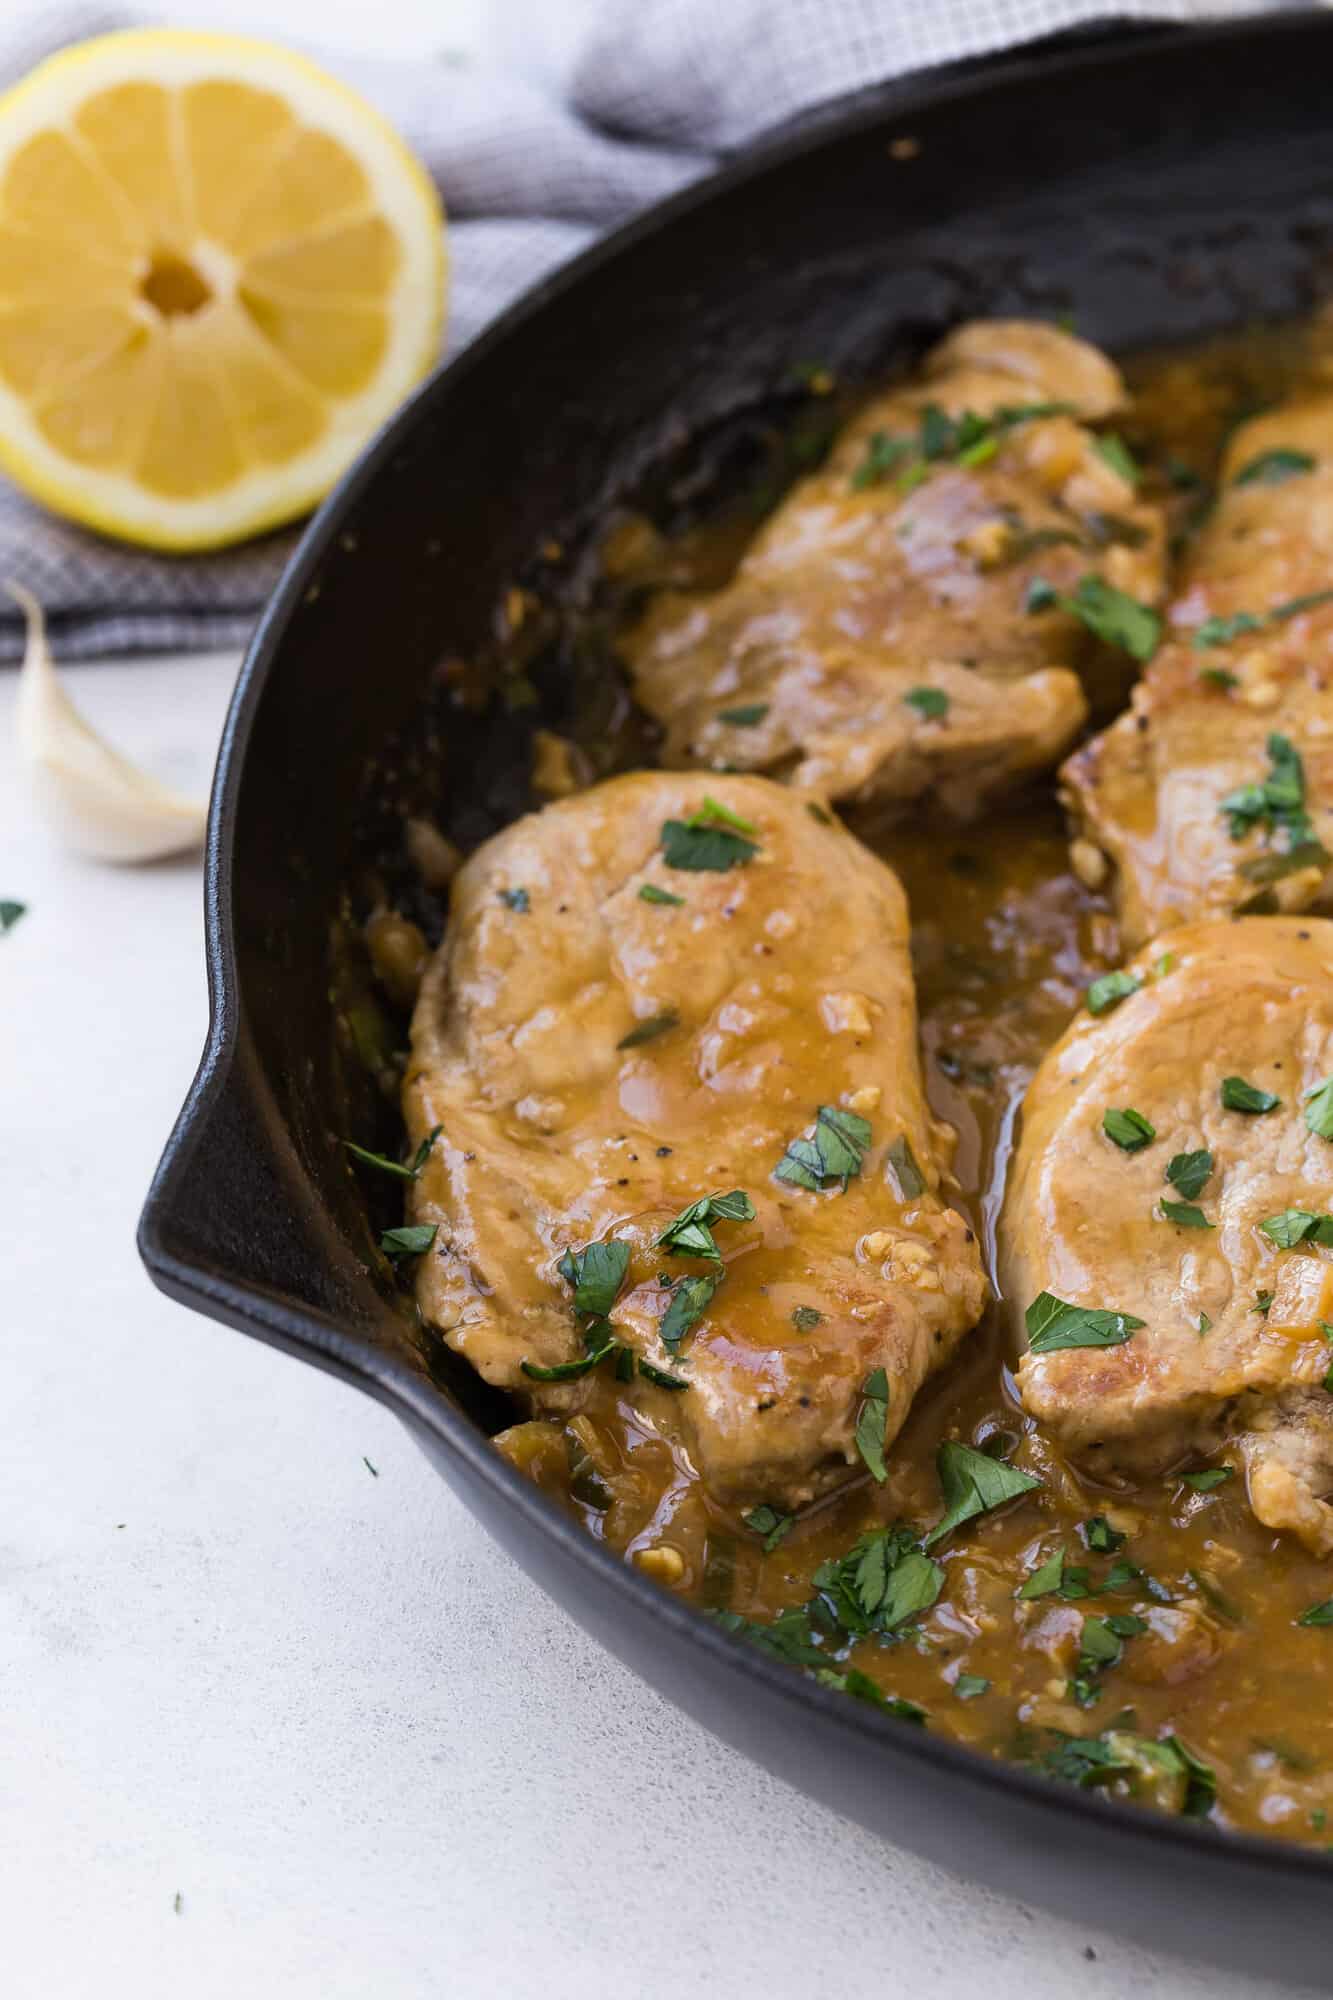 Pork medallions with sauce and parsley.